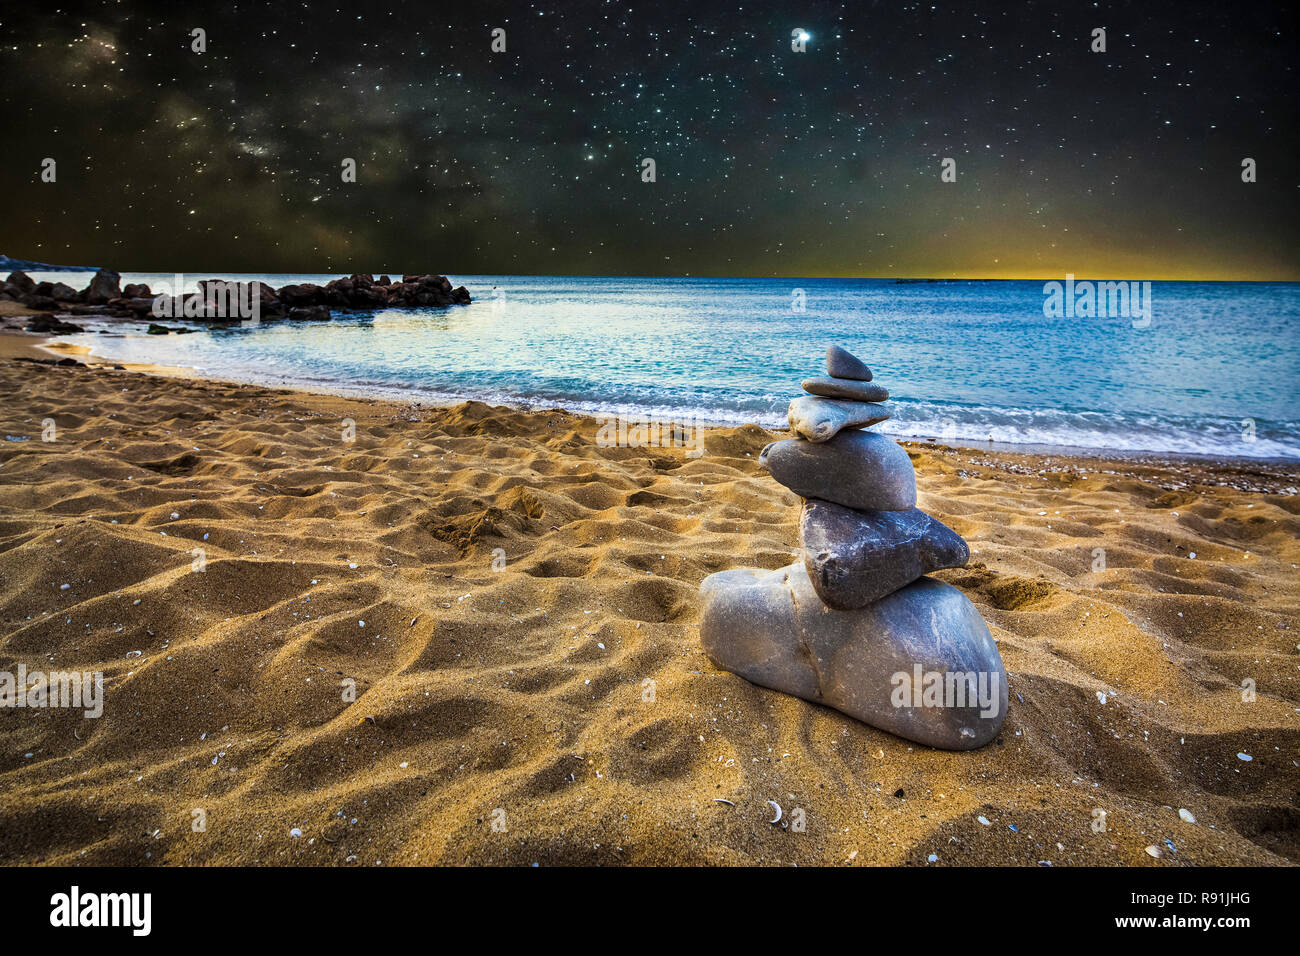 stone cairn on the sand beach, on the background  of night star landscape, concept of balance Stock Photo